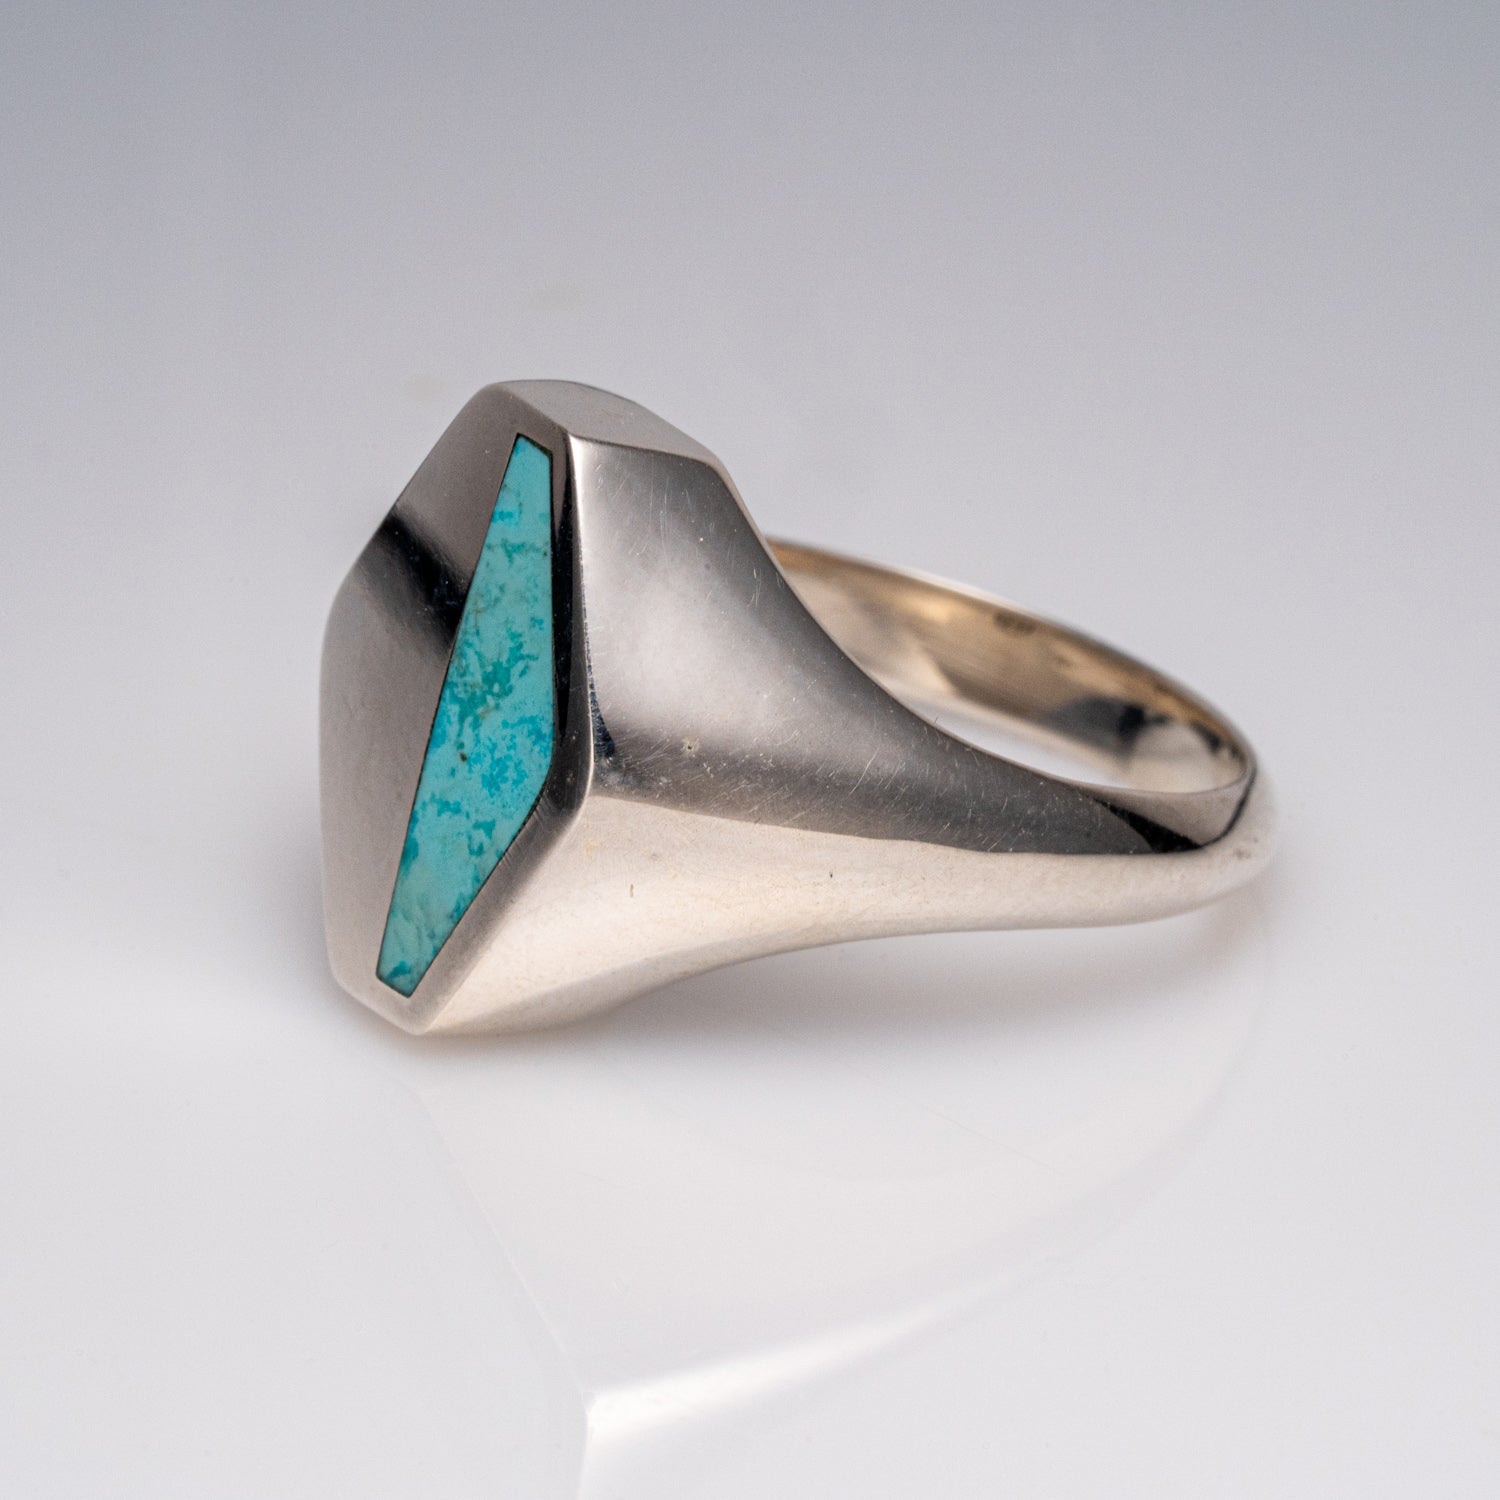 Genuine Turquoise Sterling Silver Men's Ring (Size 10)